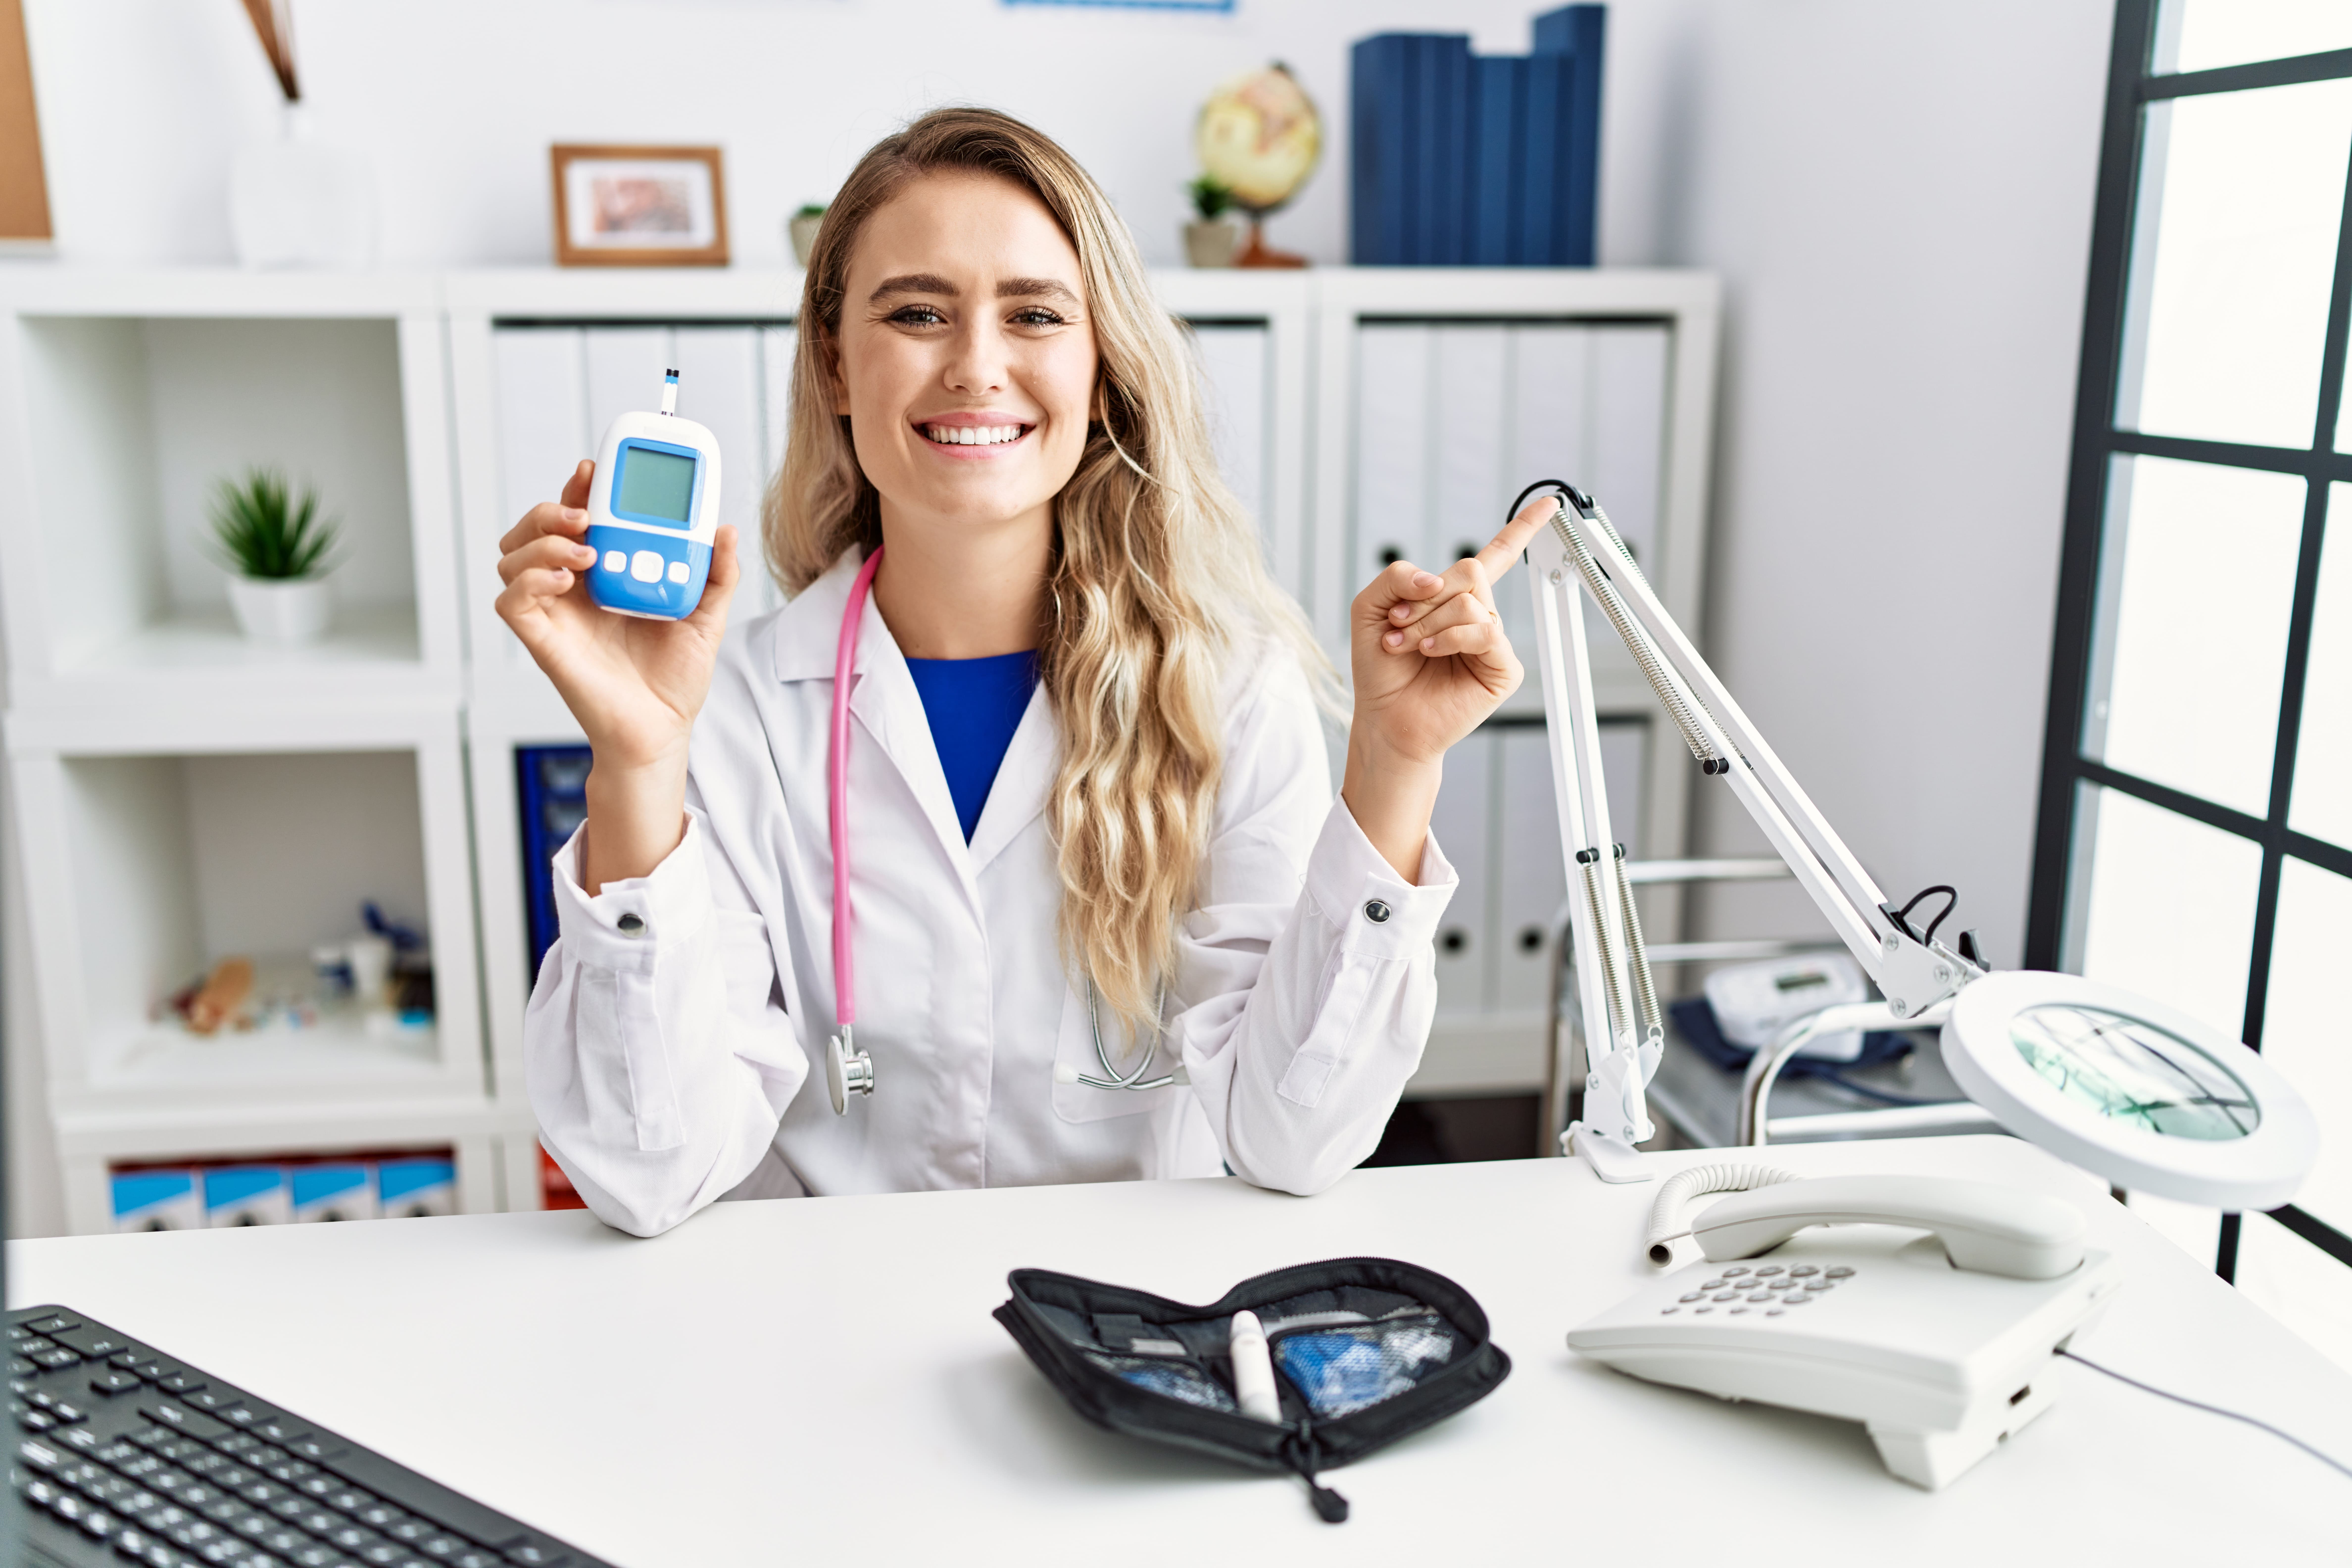 https://bo.farmaciadelomar.pt/FileUploads/servicos/medicao-do-colestrol-total/young-beautiful-doctor-woman-holding-glucose-meter-smiling-happy-pointing-with-hand-finger-side-1.jpg